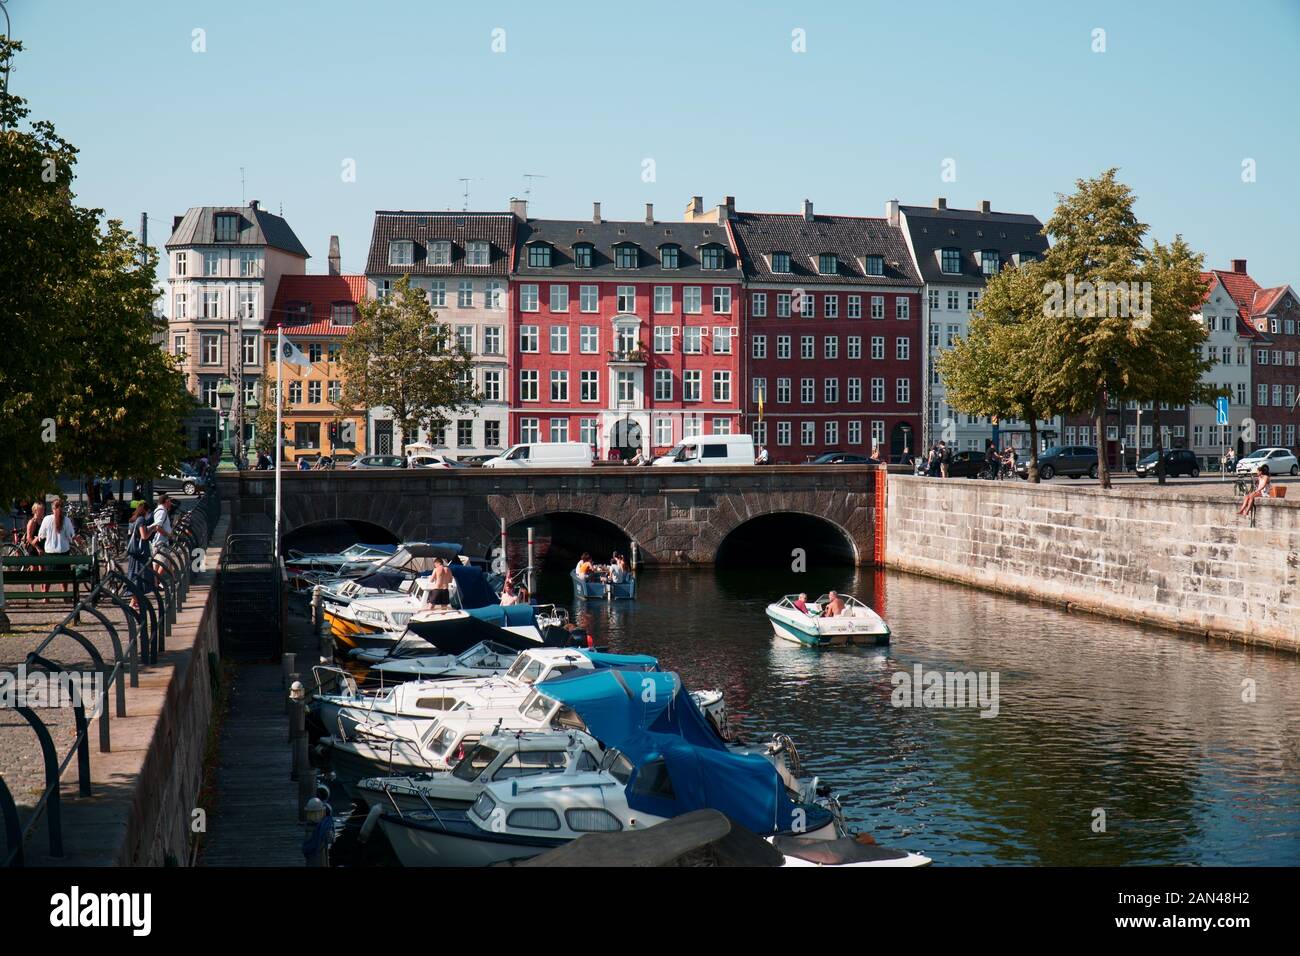 Boats docked in a canal in Copenhagen, Denmark, looking out to colourful houses Stock Photo